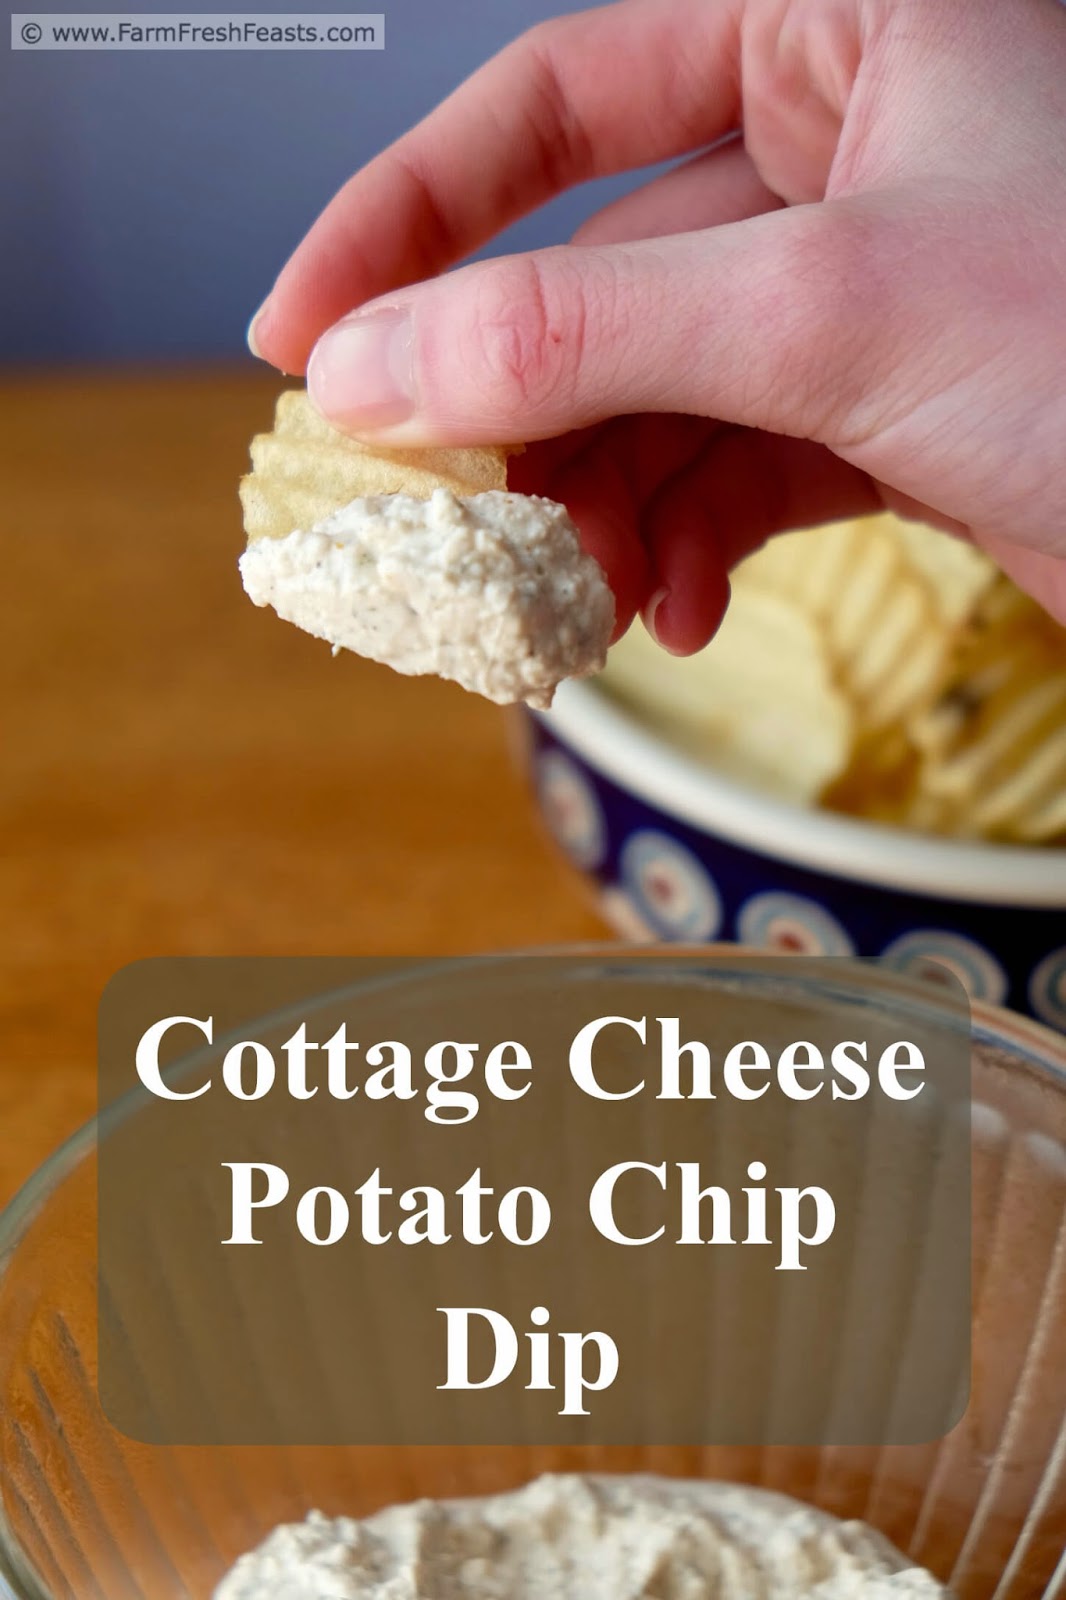 Farm Fresh Feasts Spiced Cottage Cheese Chip Dip